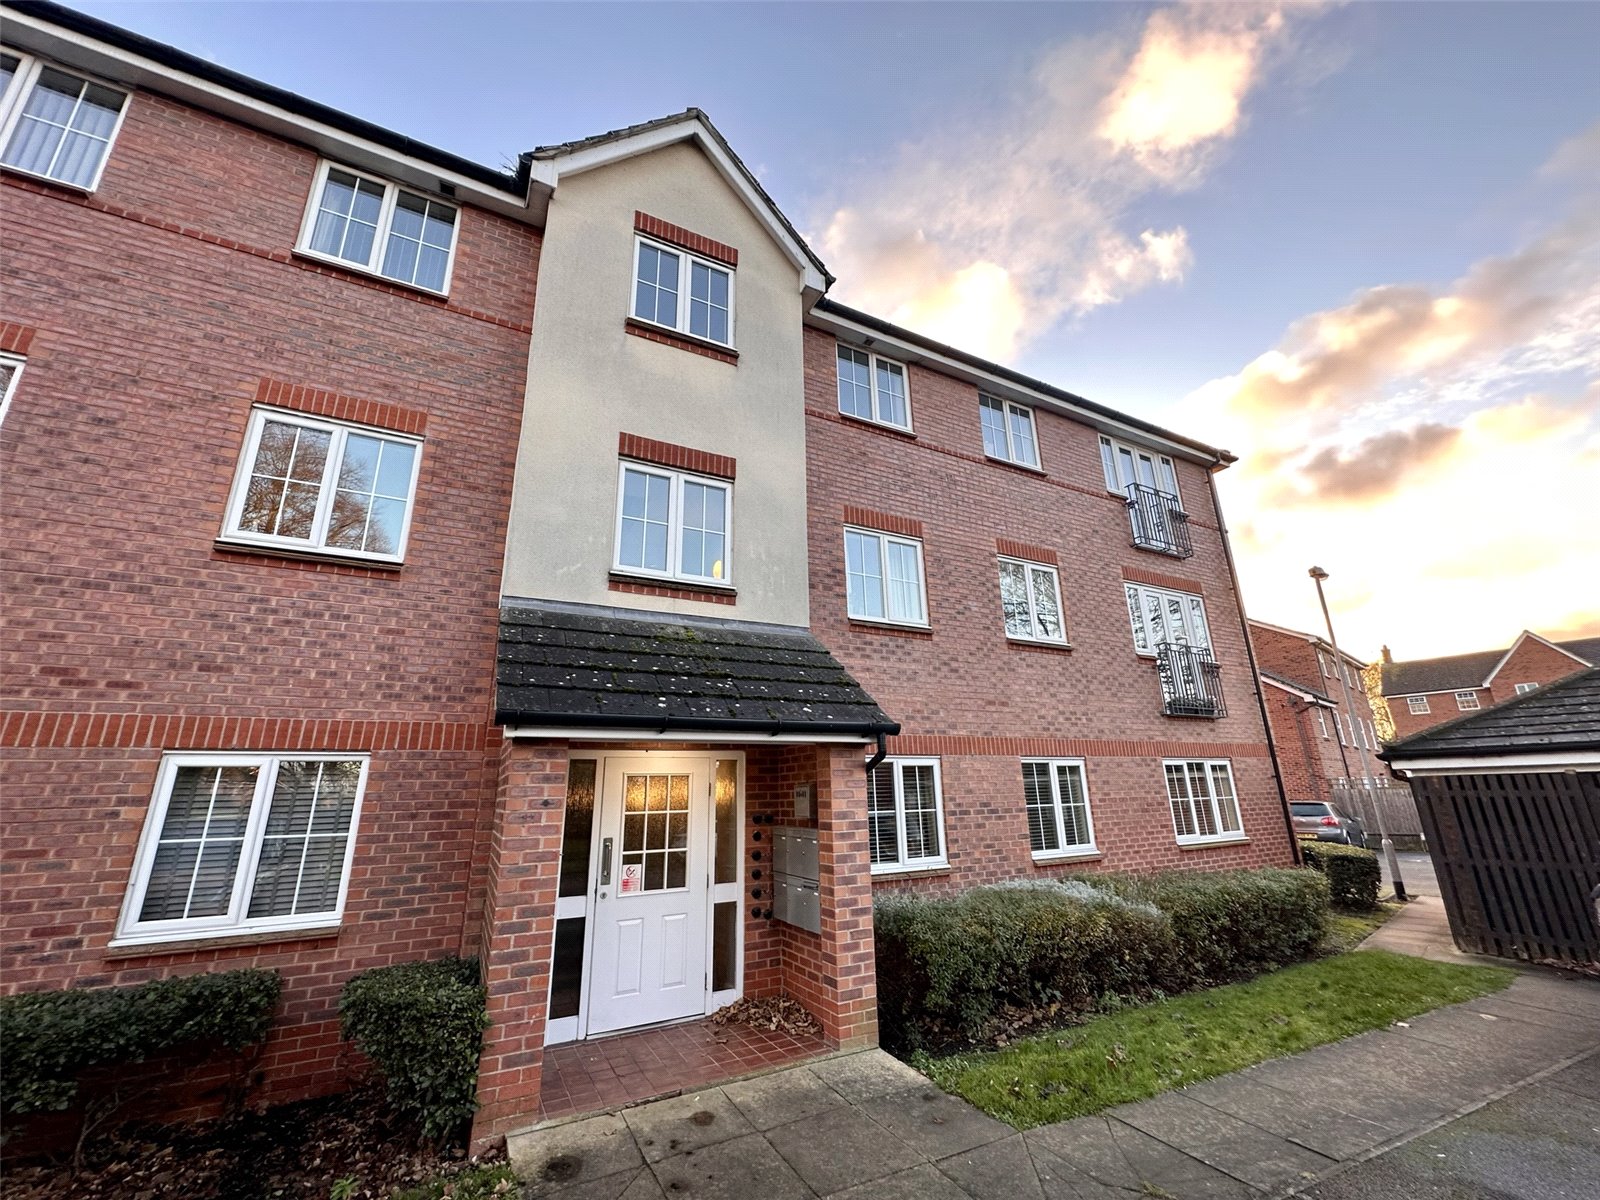 2 bed apartment for sale in Stavely Way, Gamston - Property Image 1